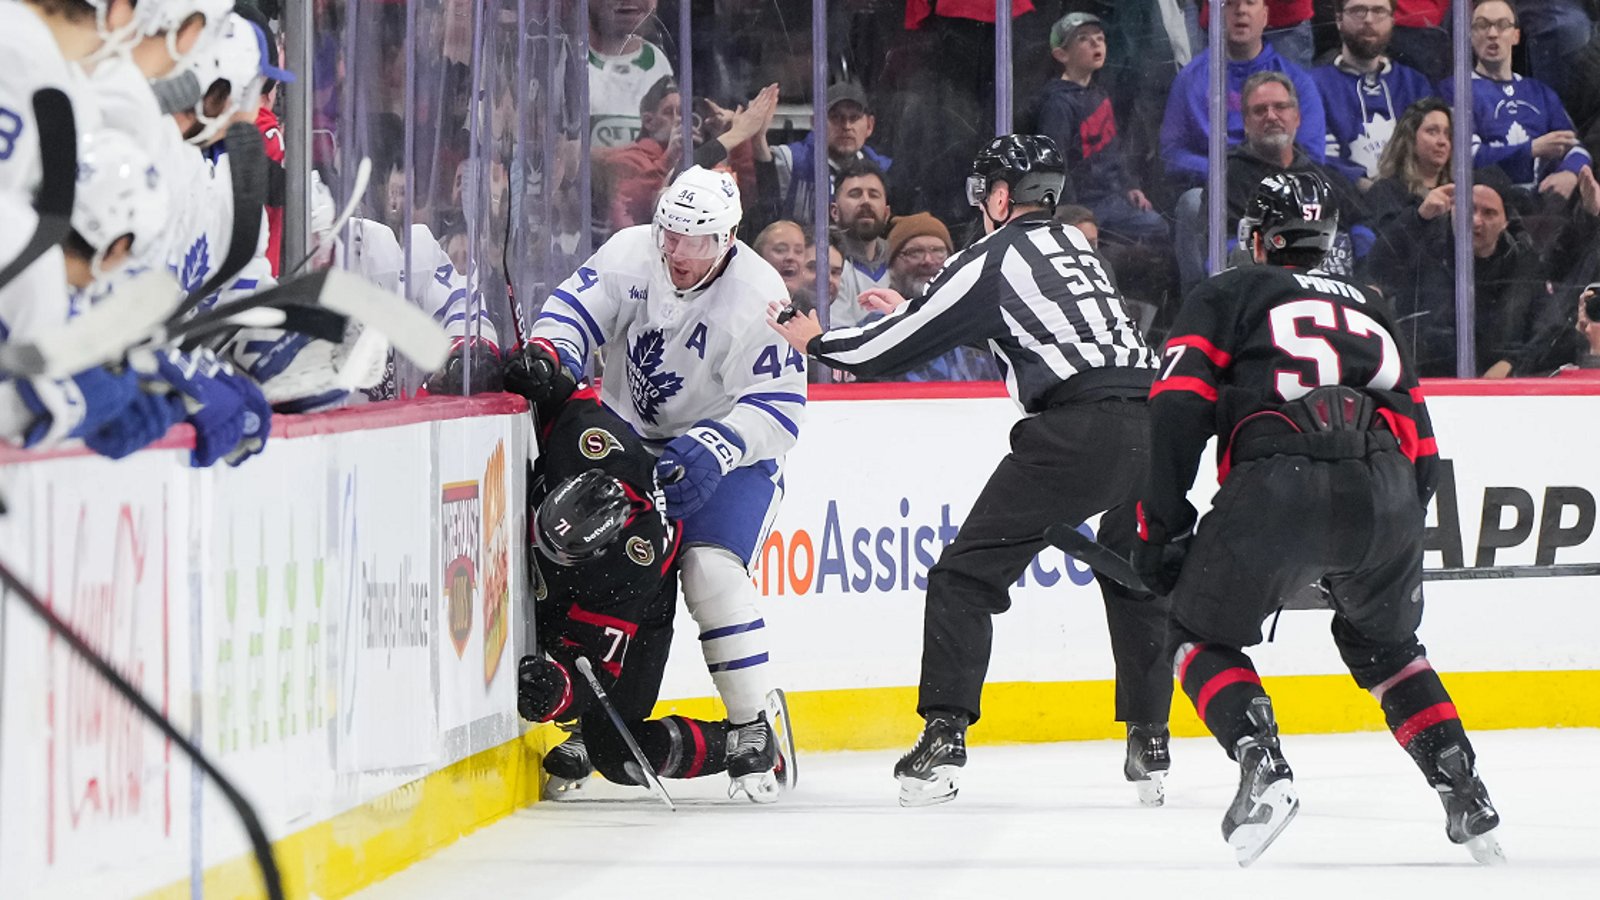 Insiders slam NHL Player Safety over Morgan Rielly hearing.